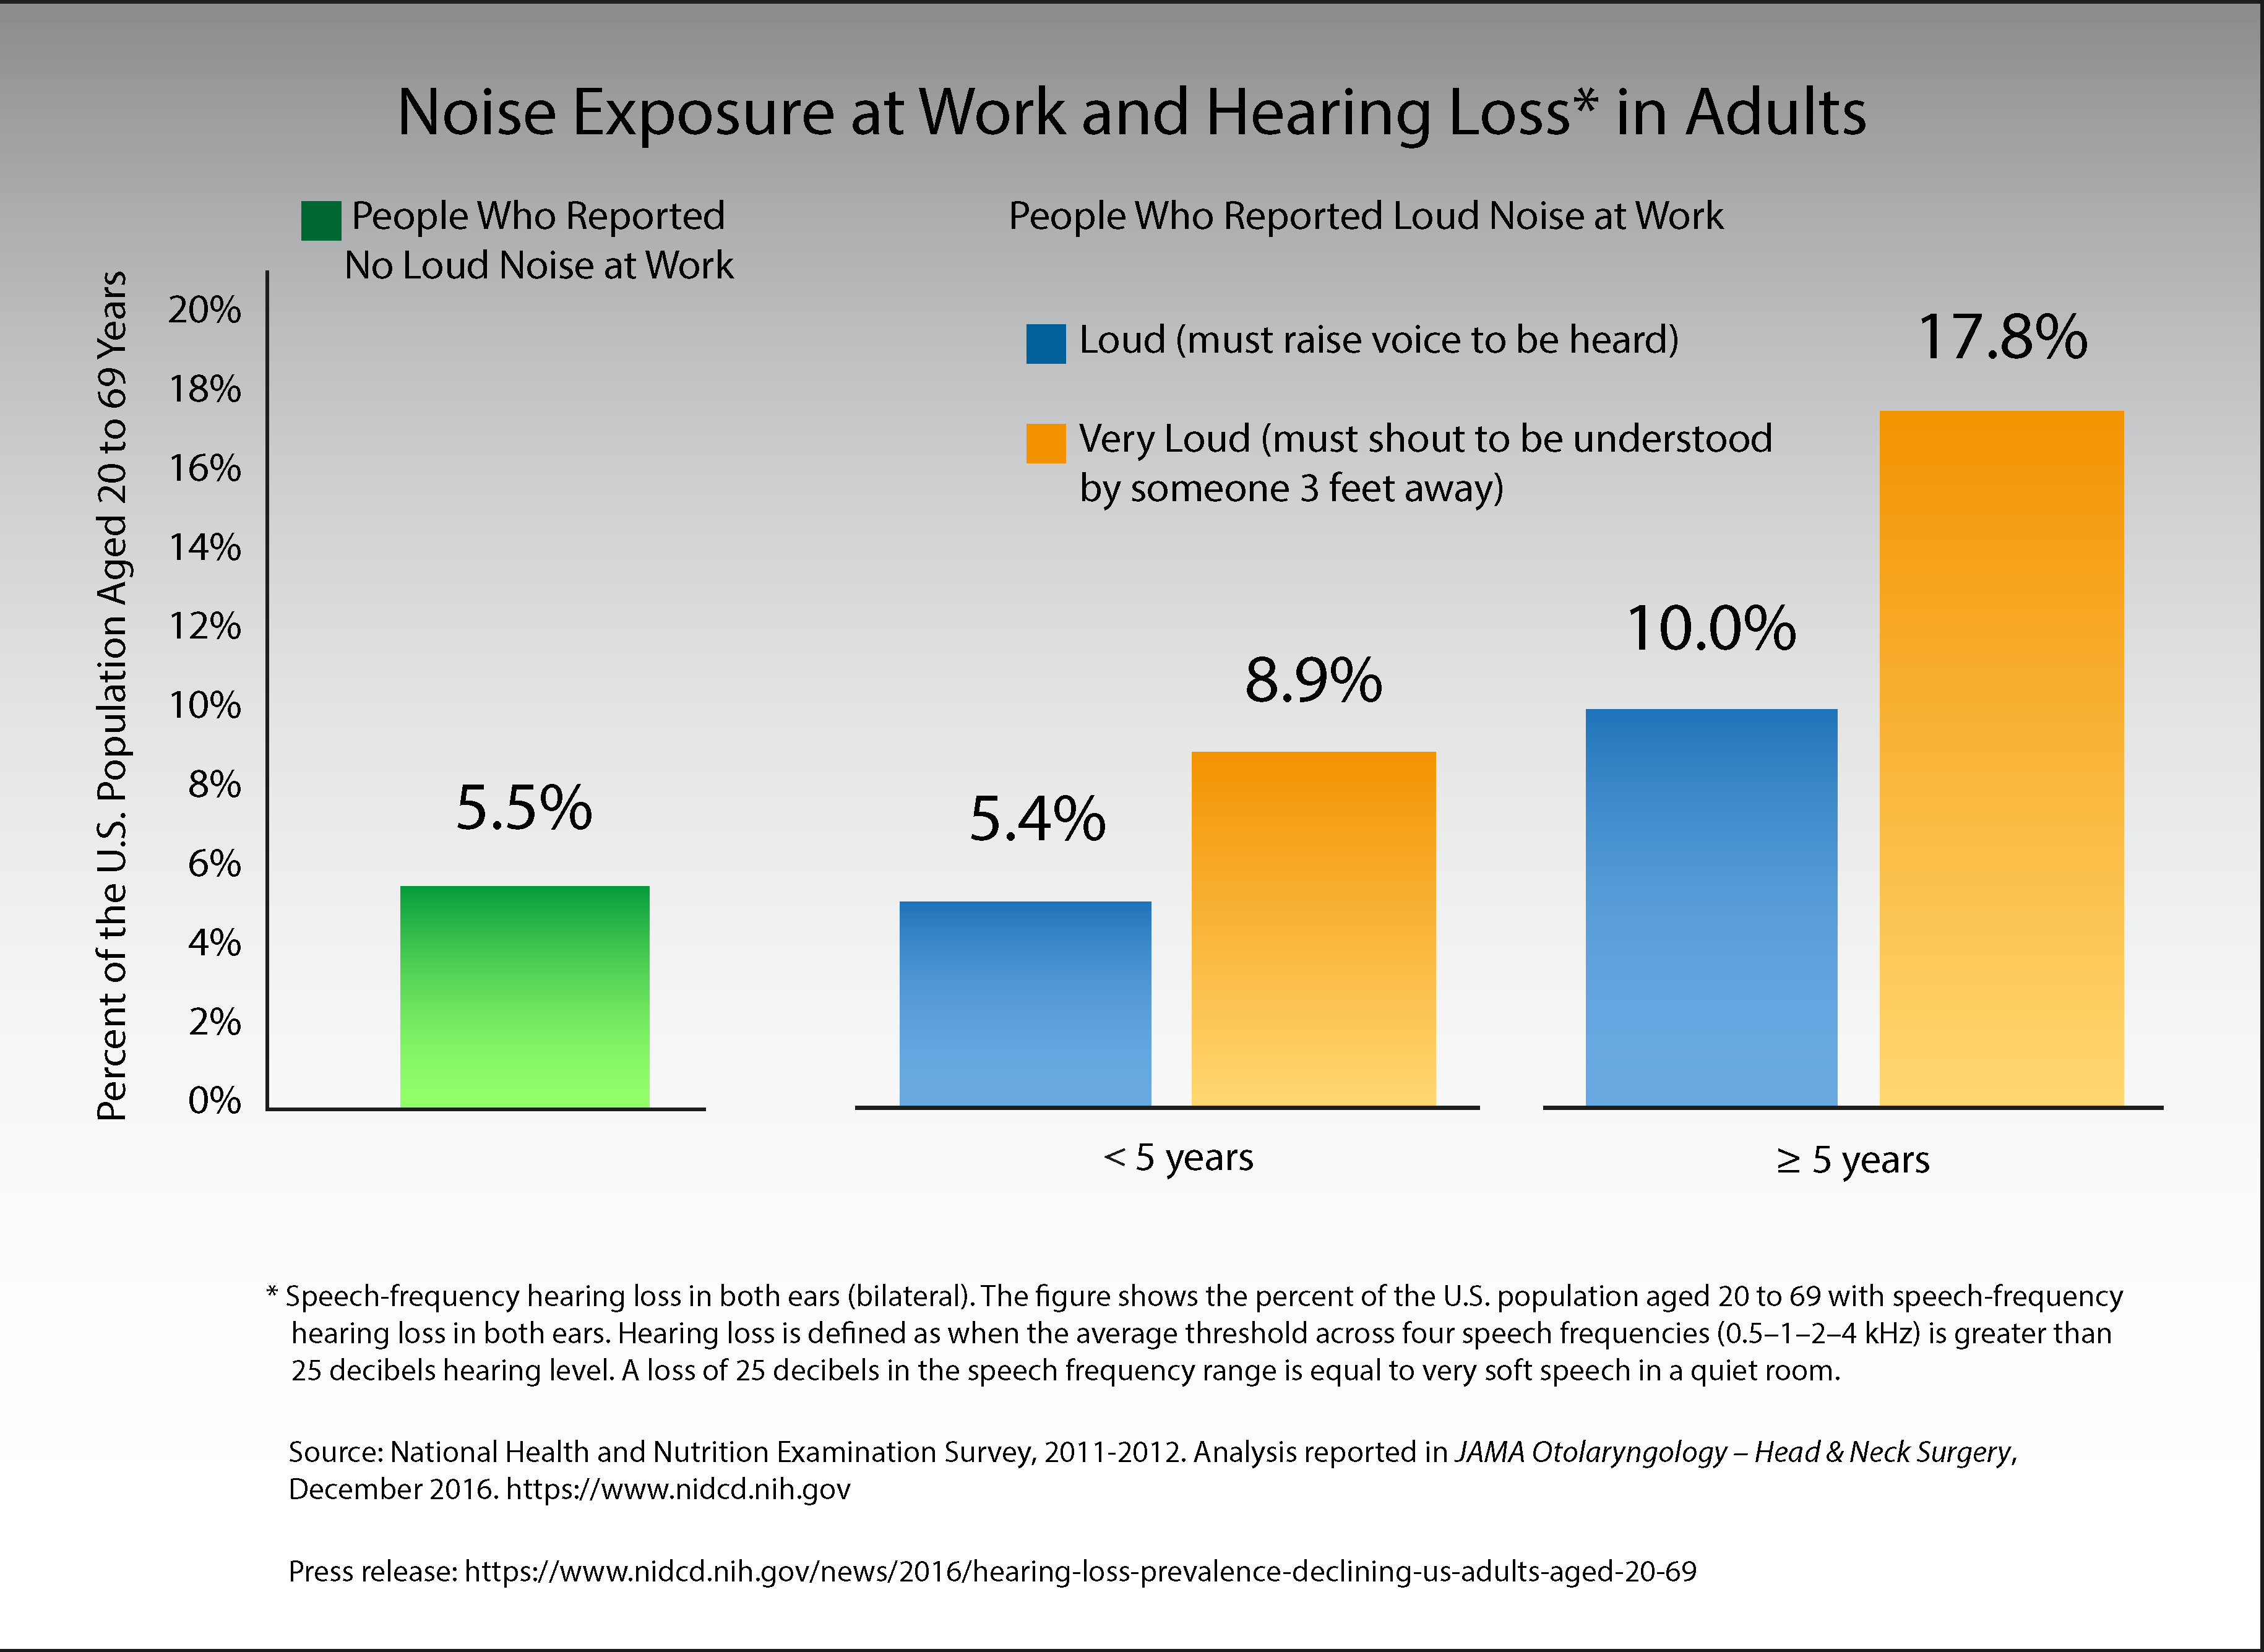 Noise Exposure at Work and Hearing Loss in Adults